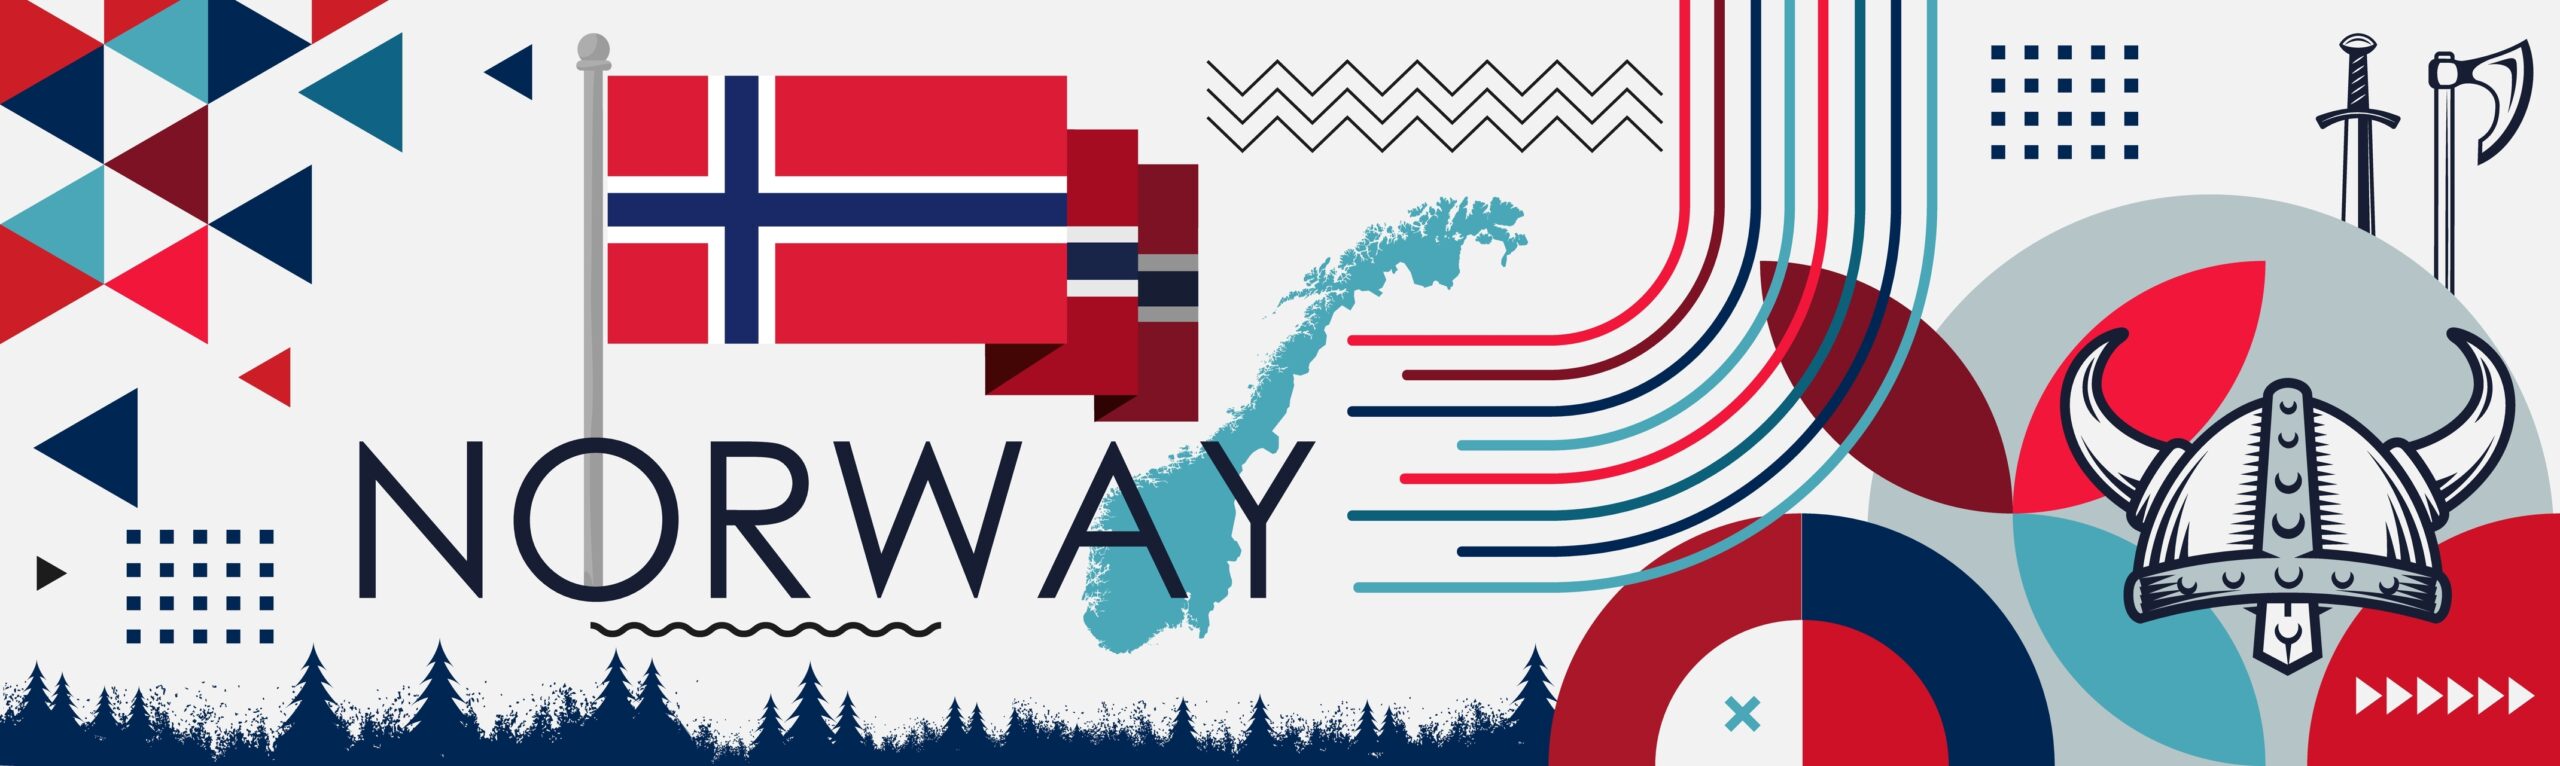 Norway national day banner design. Norwegian flag and map theme with Oslo Viking helmet background. 